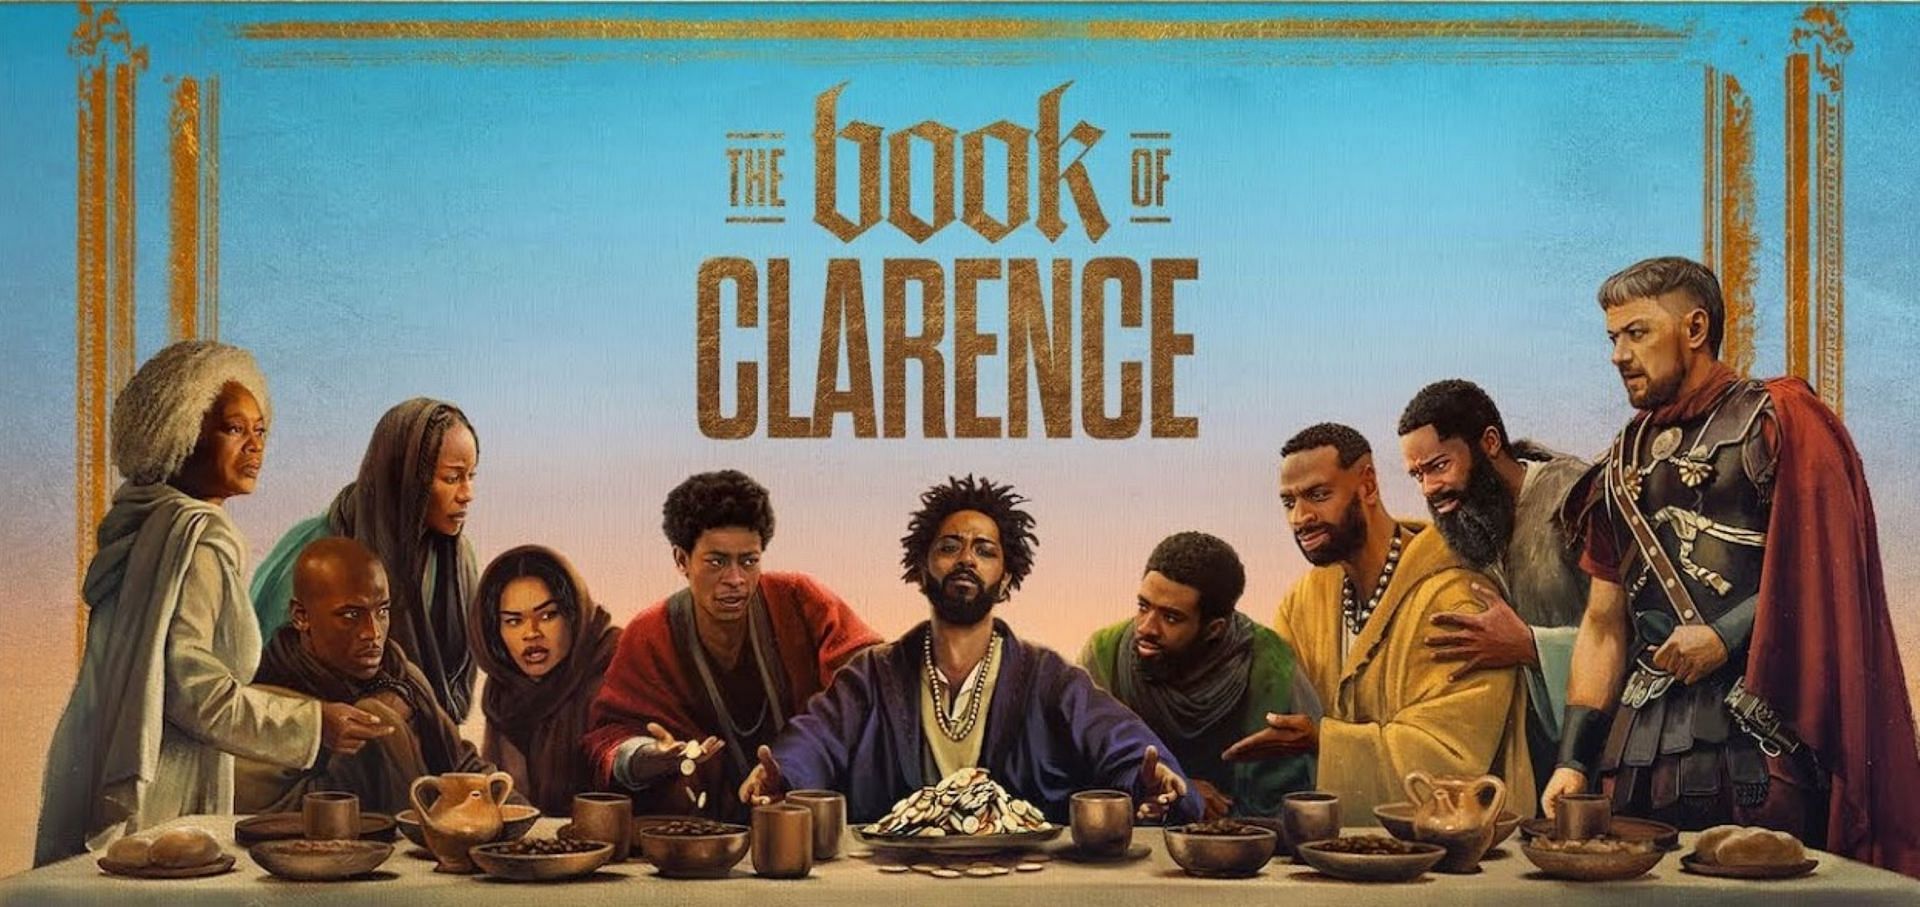 The Book of Clarence is a comedy-drama film set in the Biblical times (Image via Youtube/ Sony Pictures Entertainment)